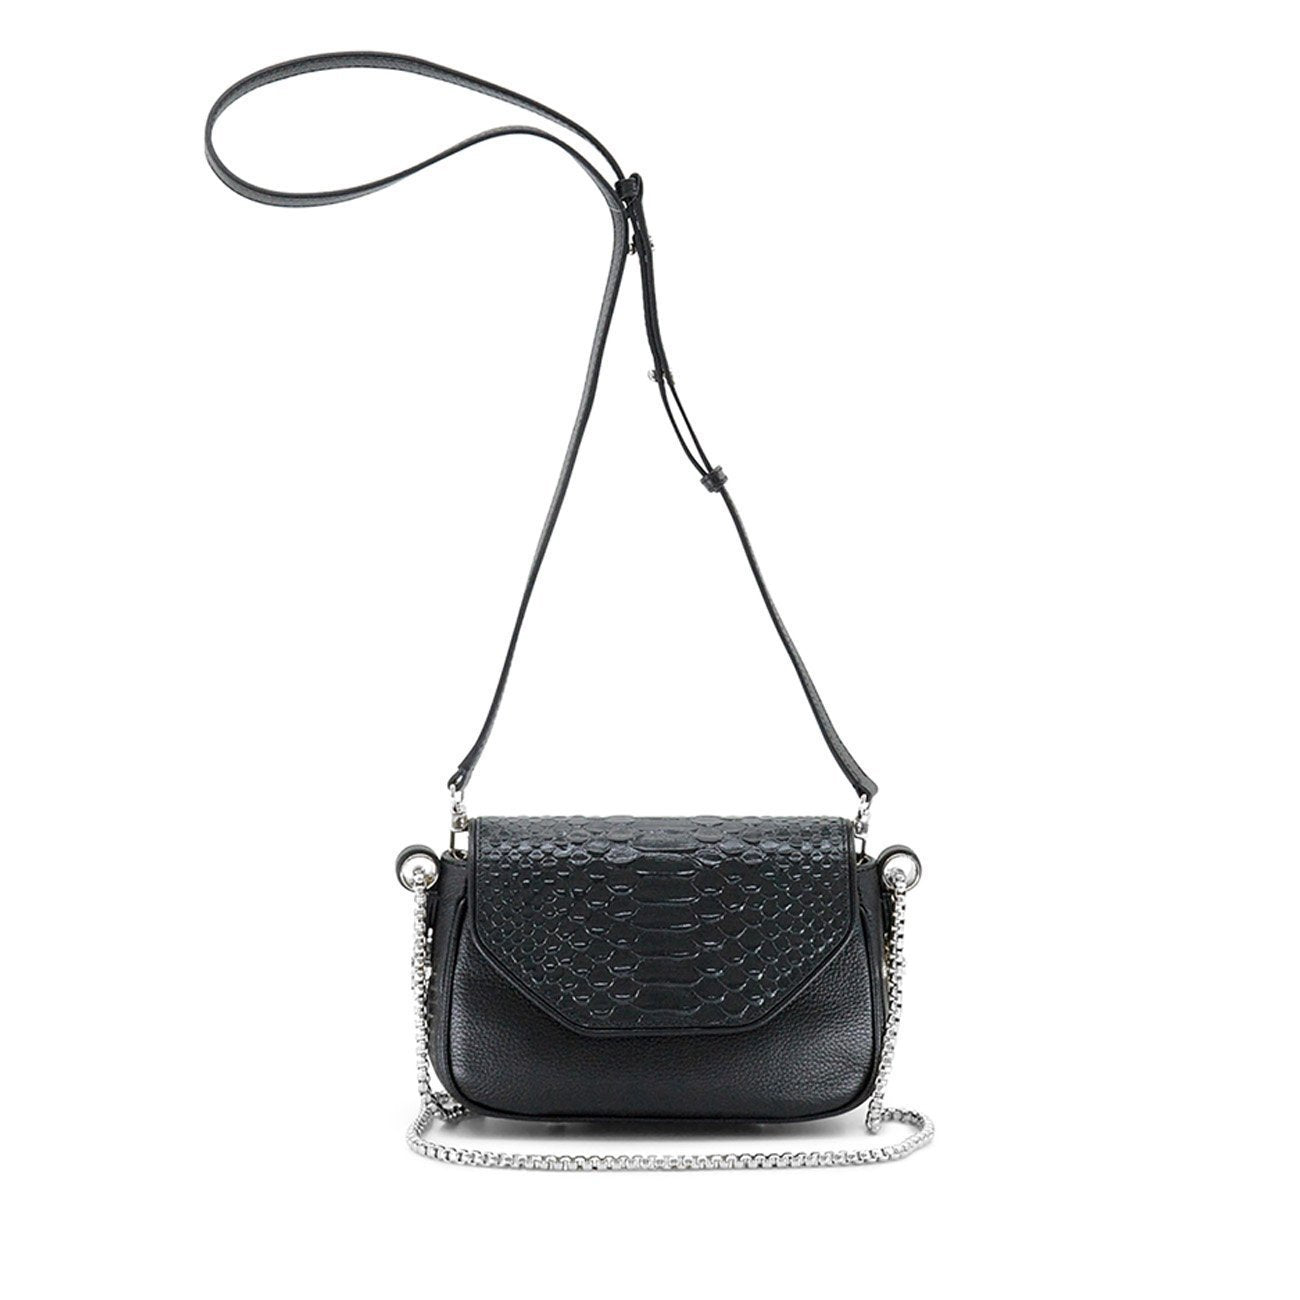 the-wax-silver-leather-bag-chain-strap-leather-strap-dylan-kain-981436_1300x